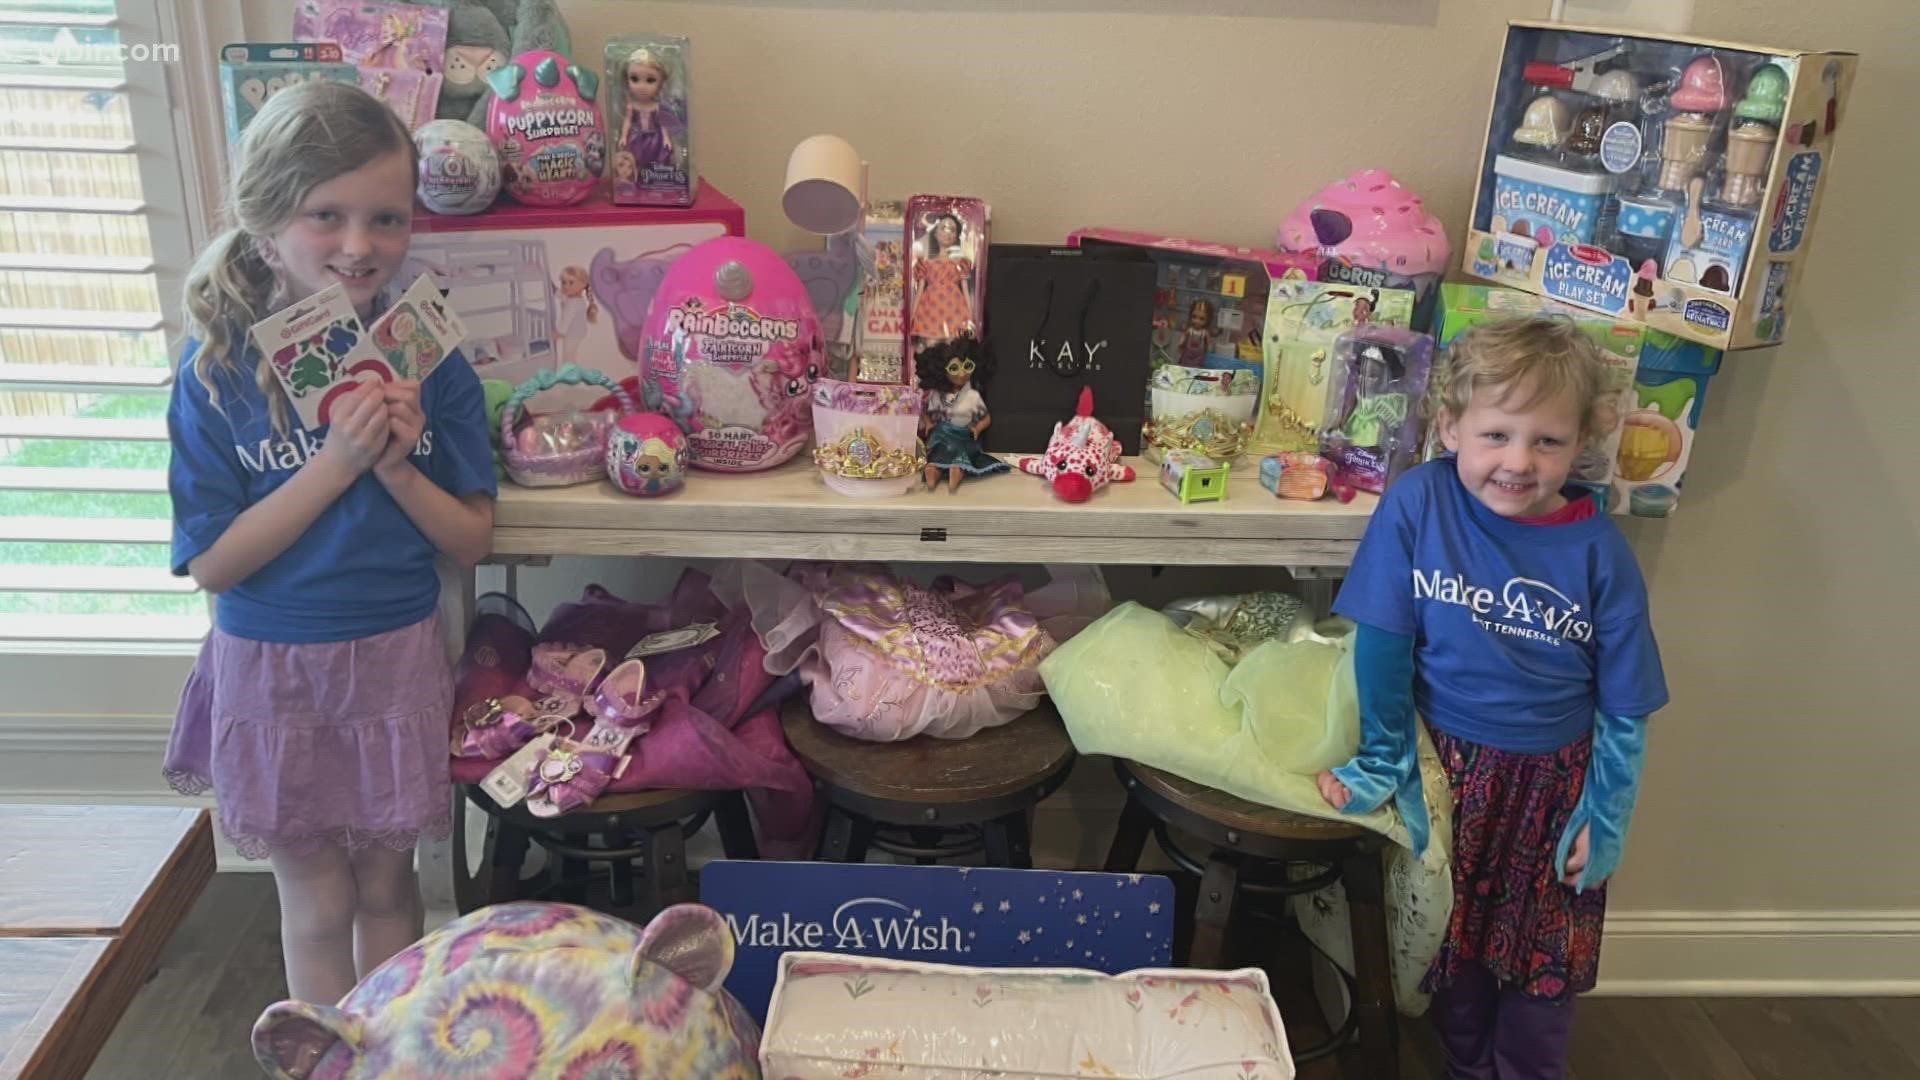 Natalie Kuykendall got to splurge on a major shopping spree for her wish. Make-A-Wish wants to help make sure more kids get a dream come true too.